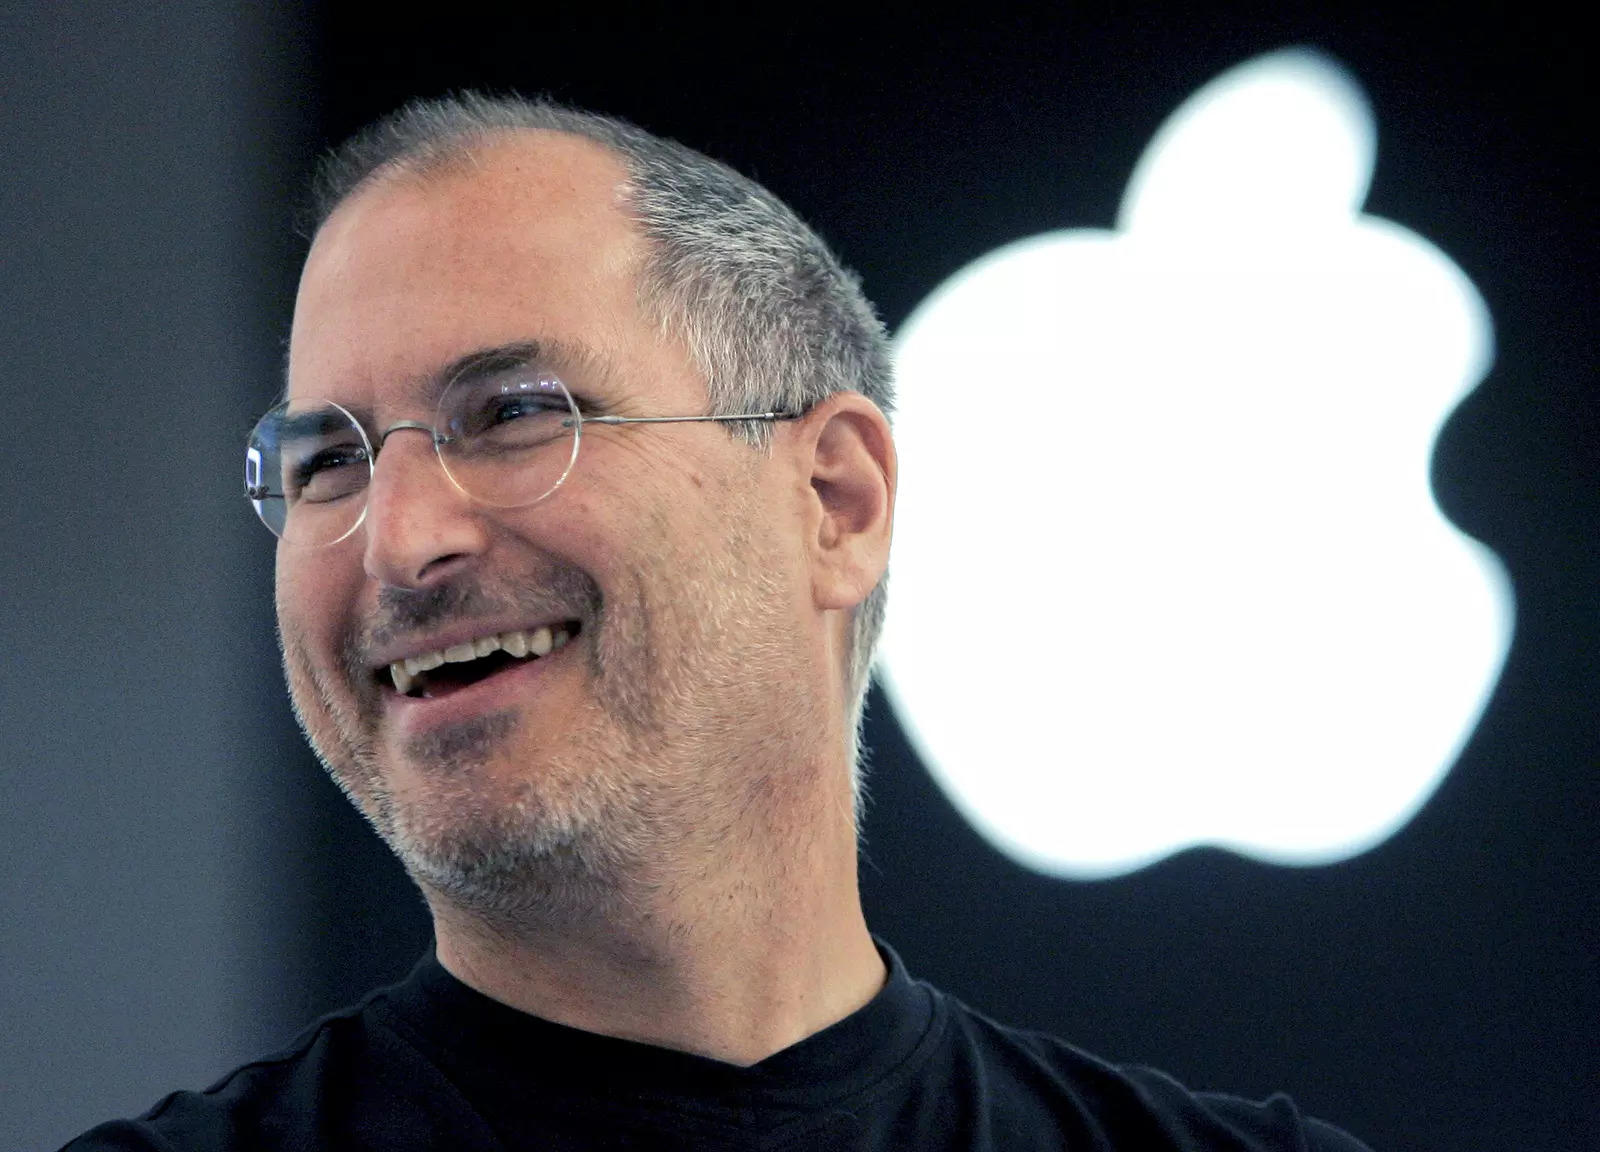 Documents signed by Steve Jobs to auction off other tech giants